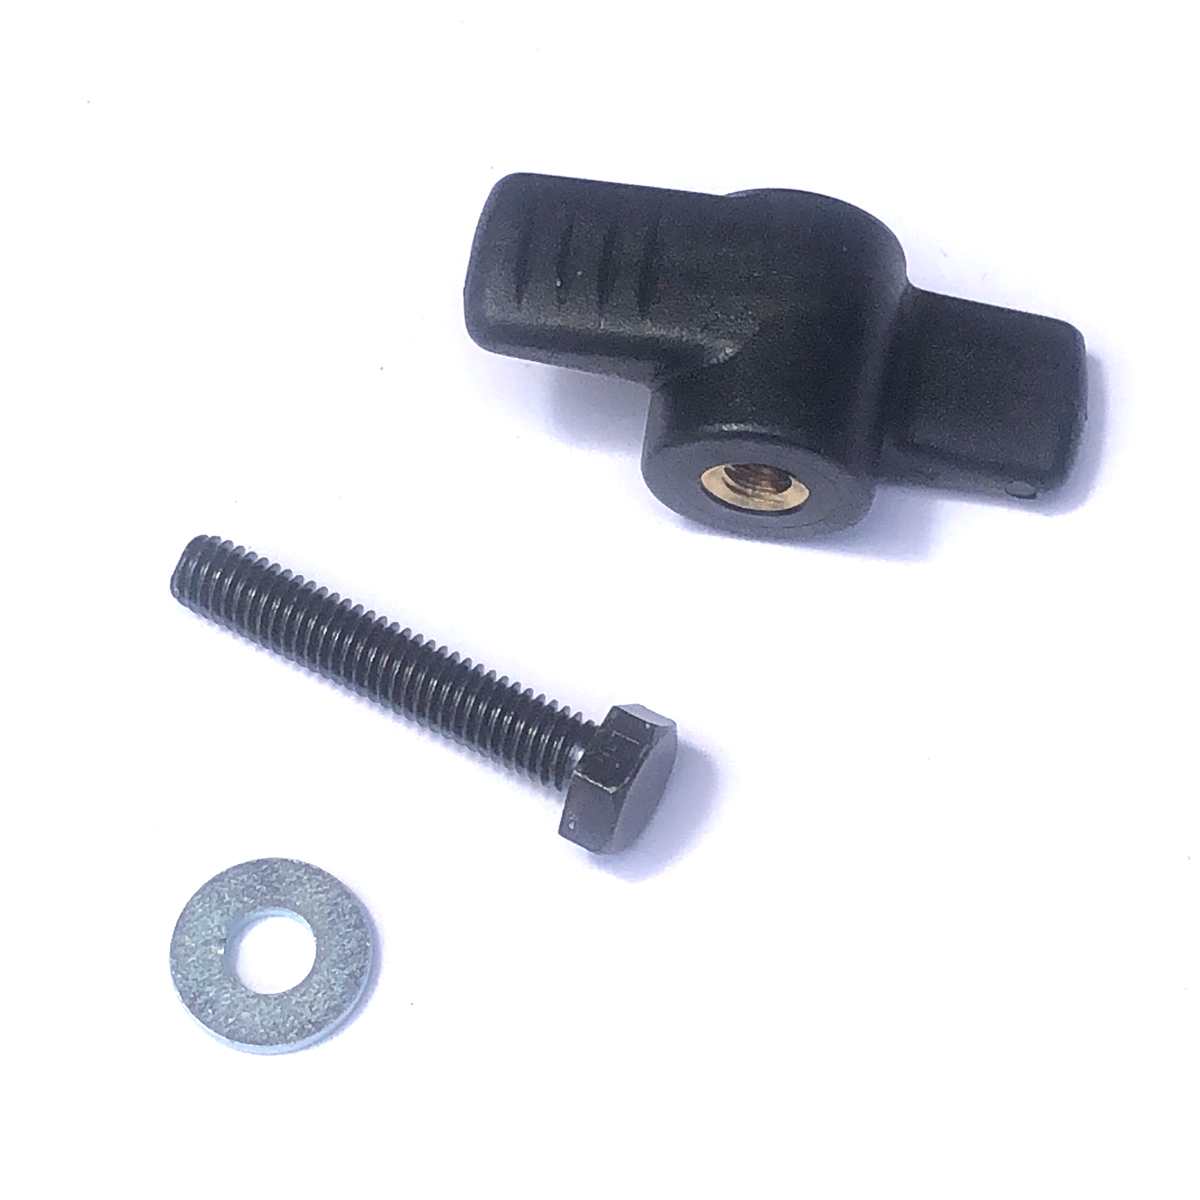 Manfrotto R144.31 Locking Knob for leg clamps